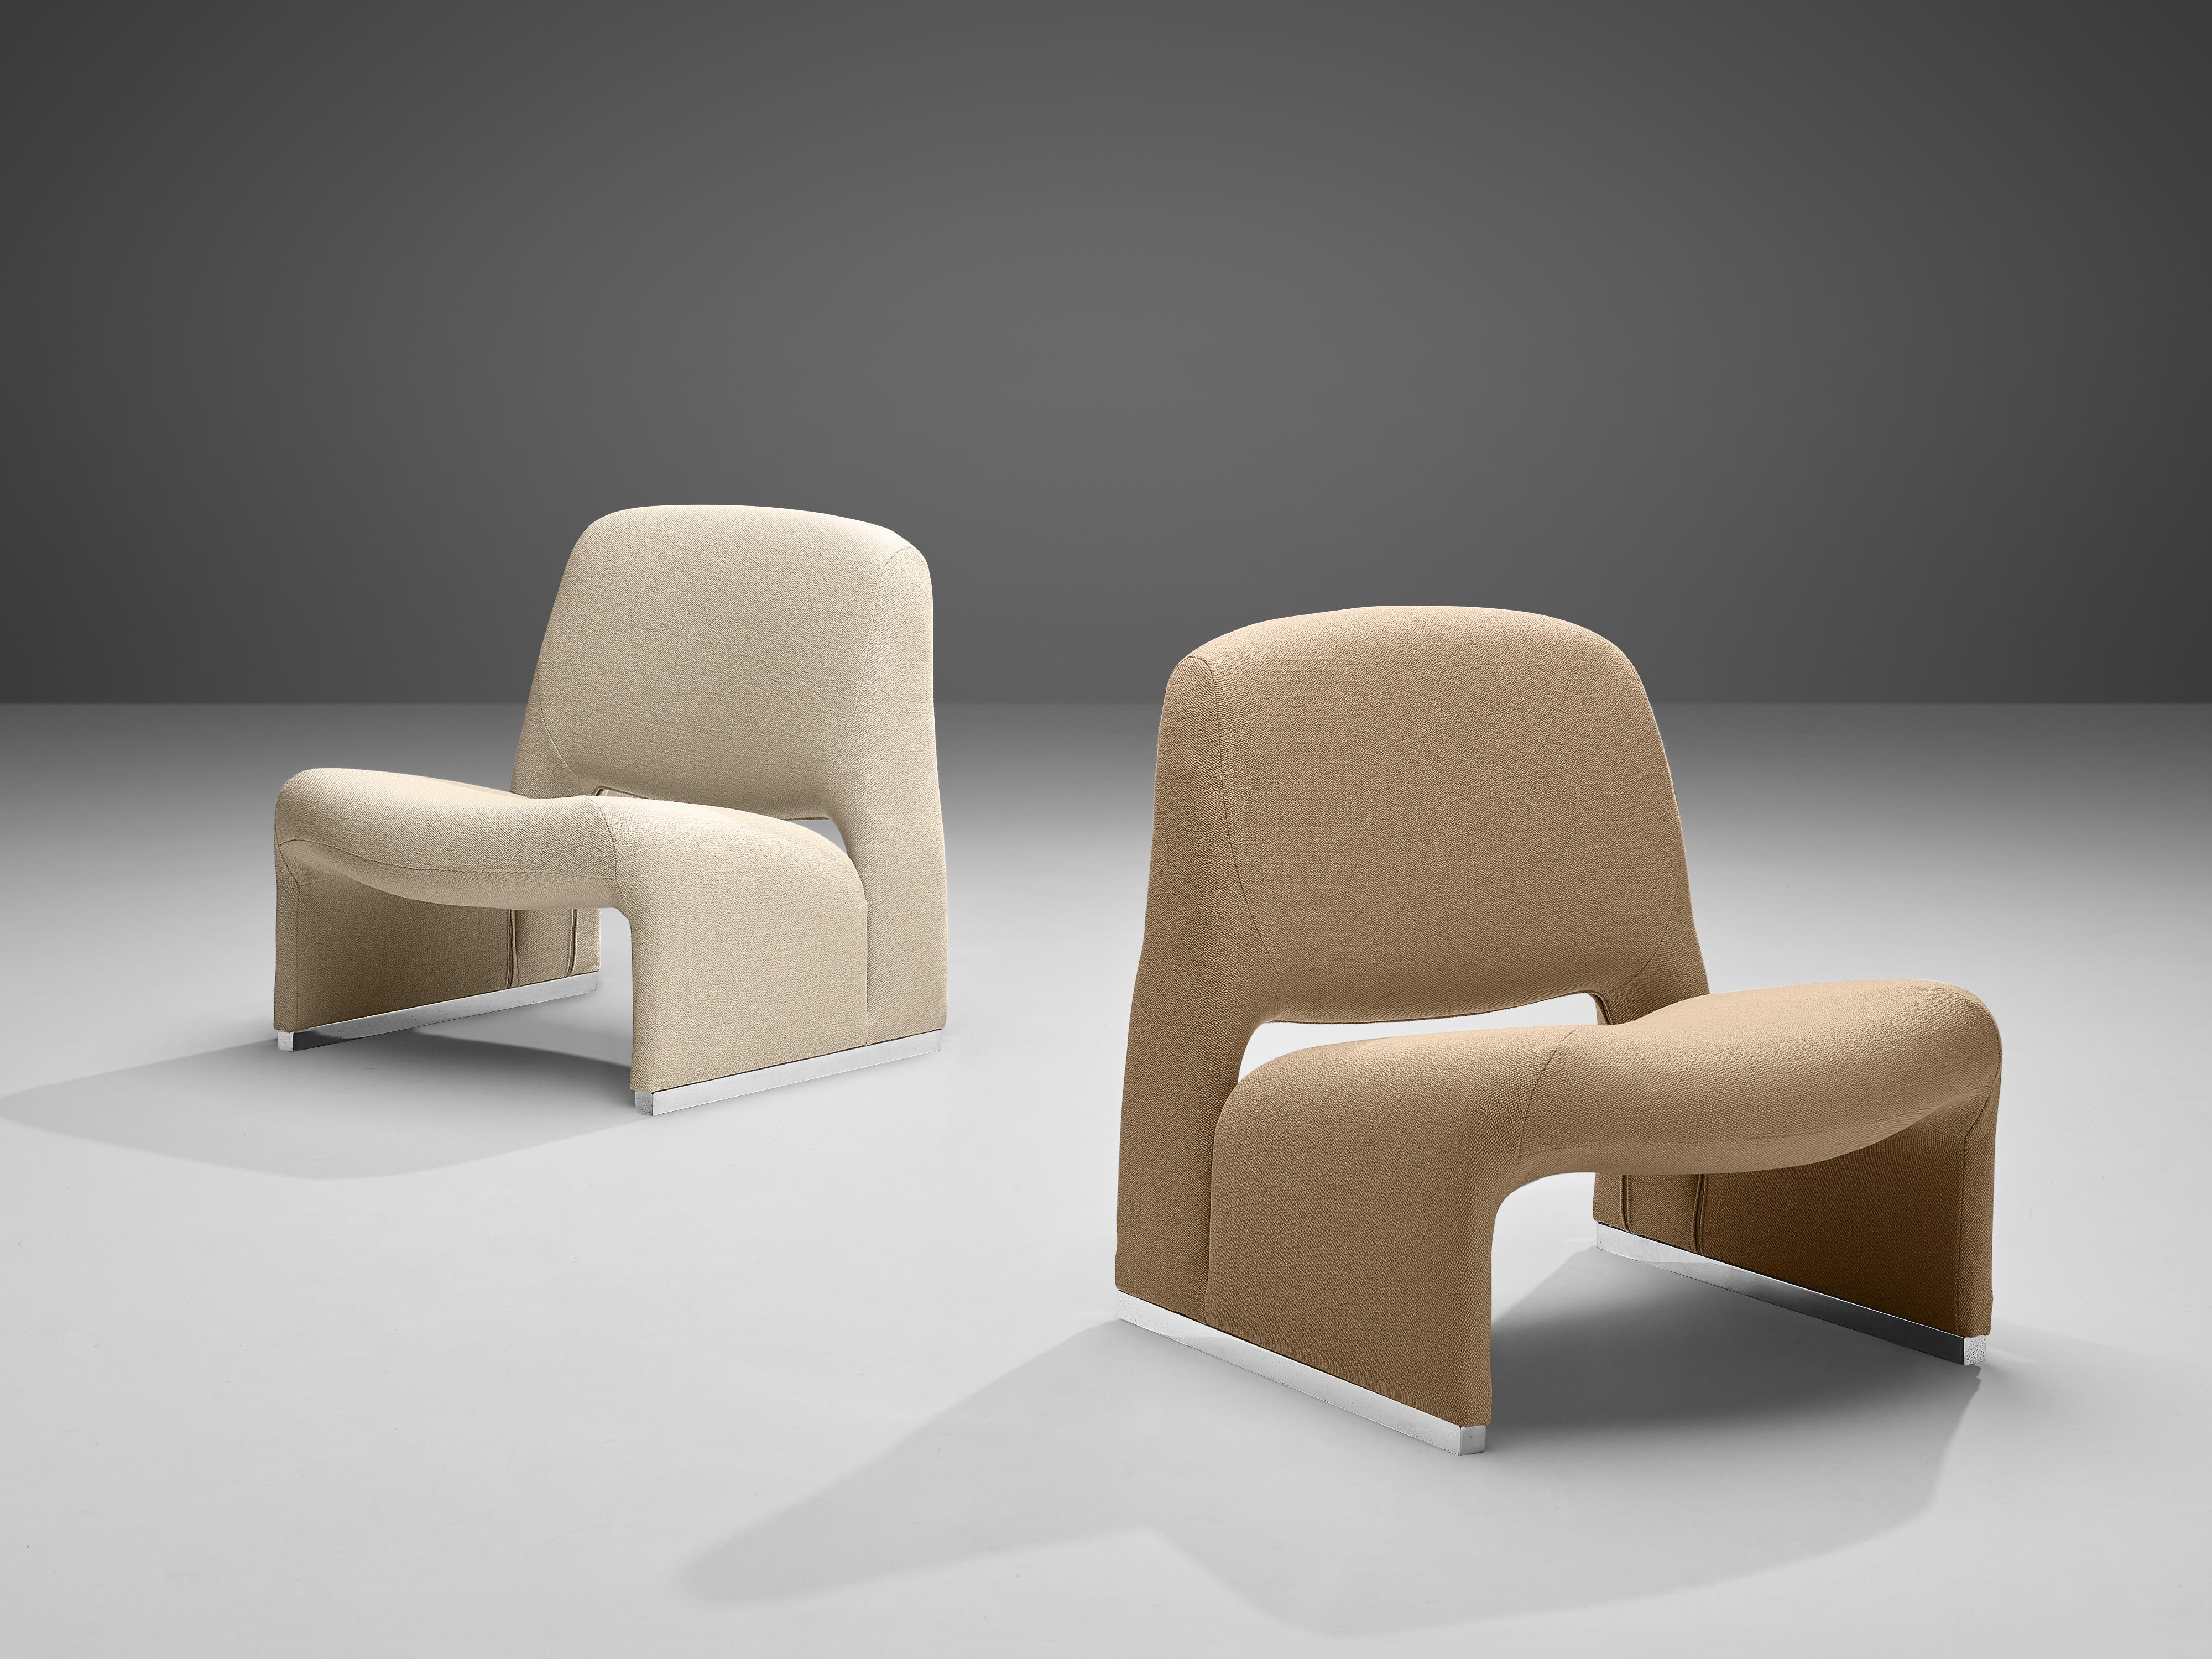 Lounge chairs, fabric, metal, Italy, 1970s

These lounge chairs strongly remind of Giancarlo Piretti’s ‘Alky’ lounge chair (1969), yet they feature characteristic differences. Whereas the ‘Alky’ lounge chair consists of one shell, these chairs